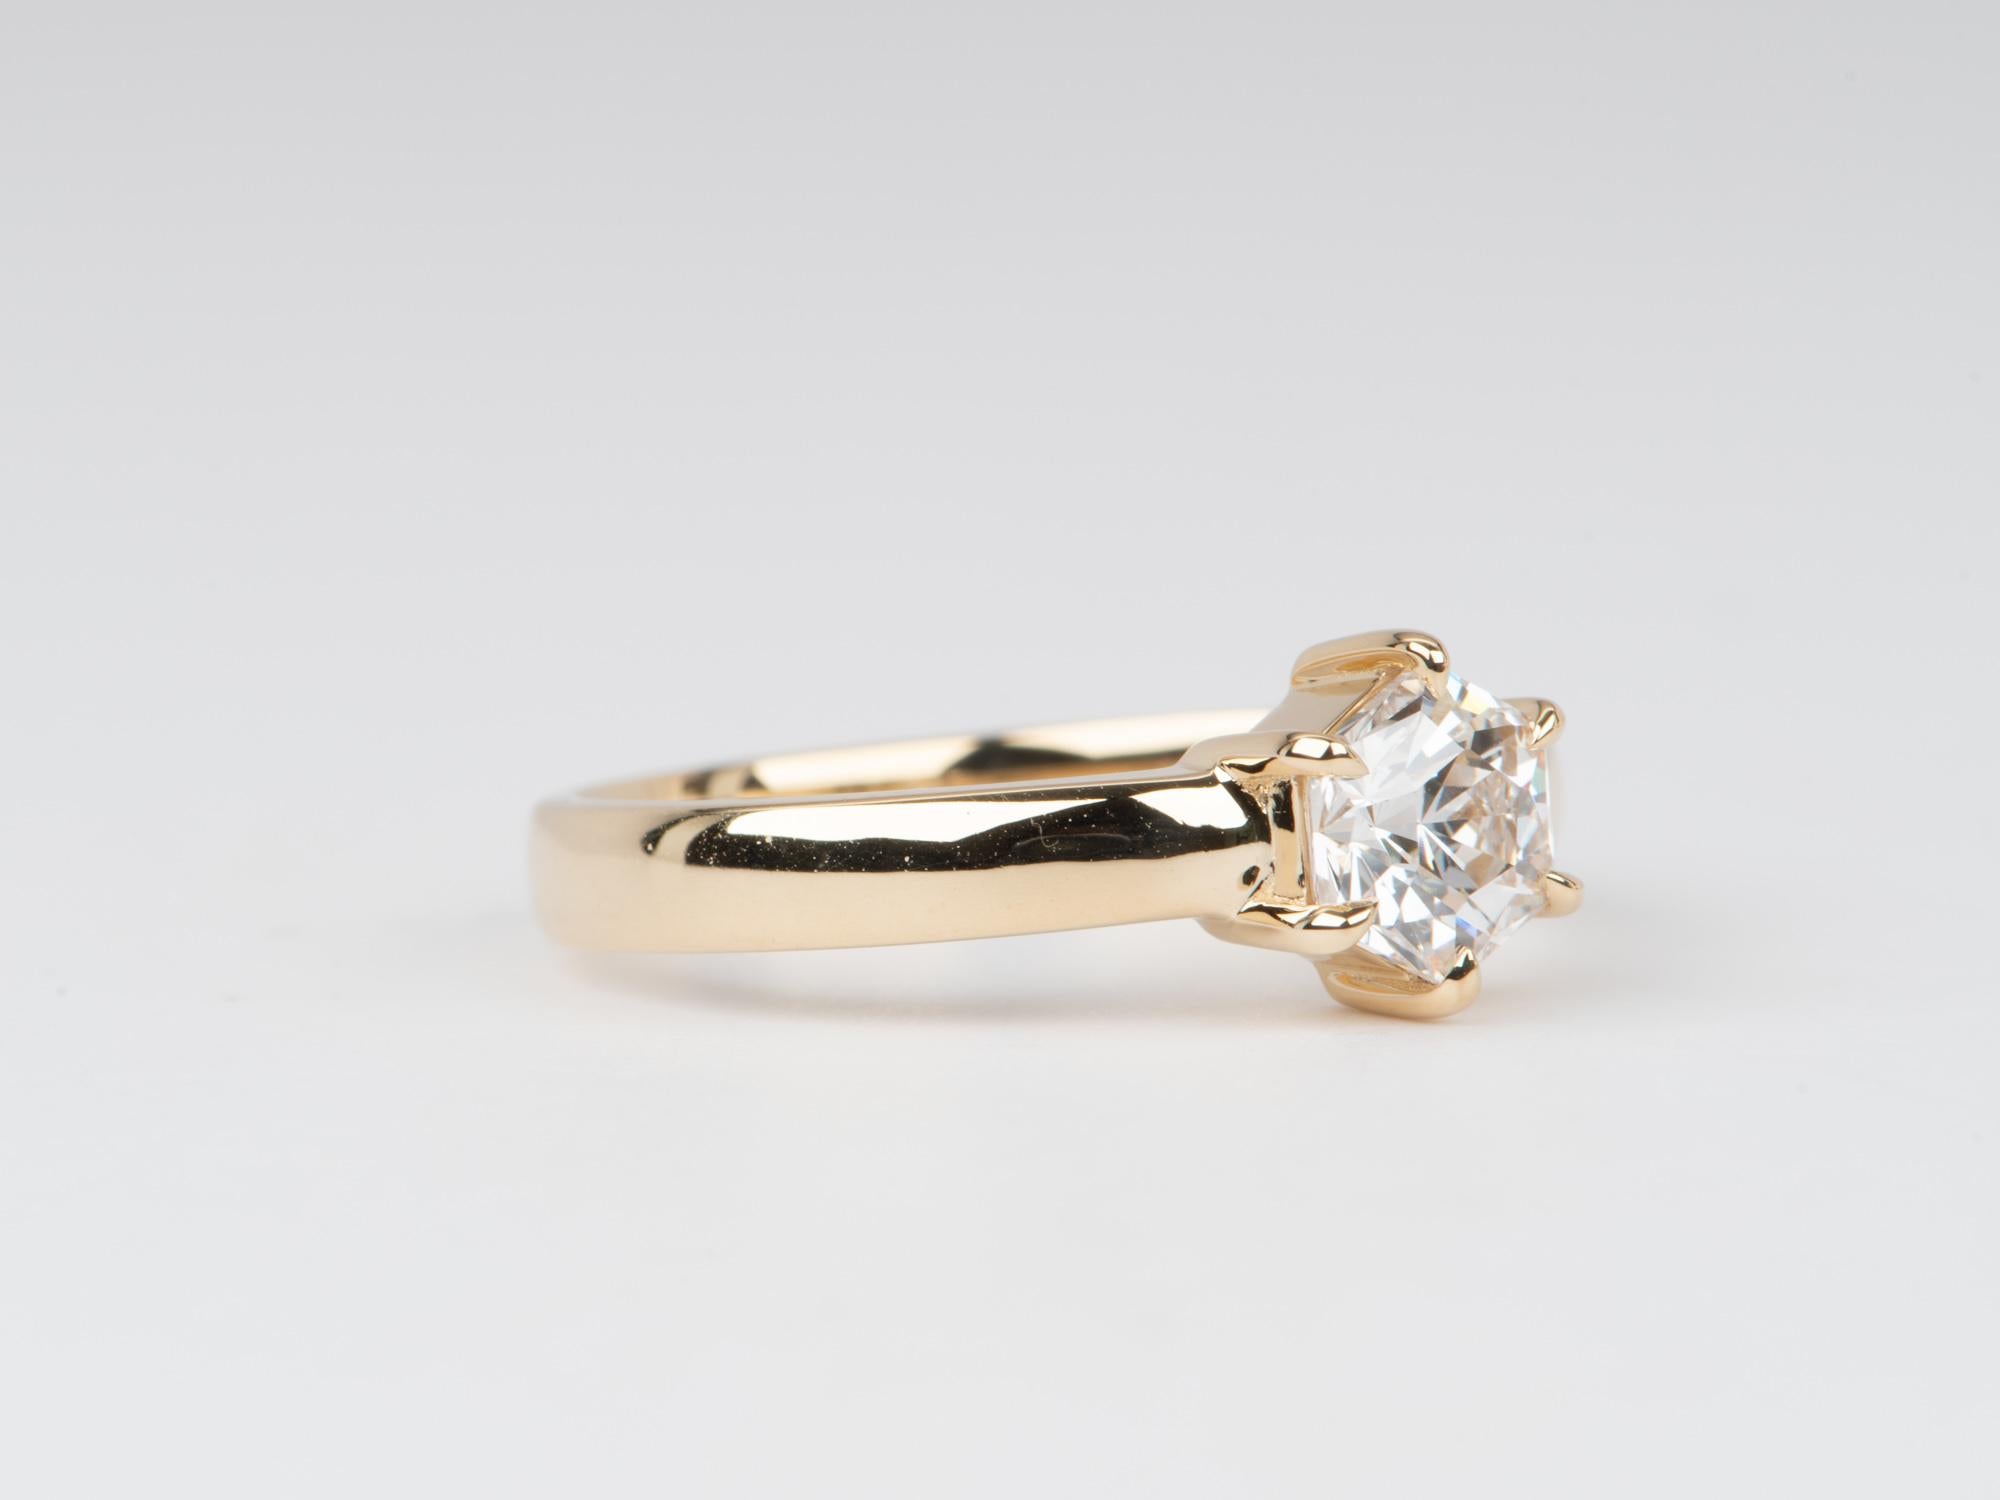 ♥ Hexagon Shape Diamond Engagement Ring on Wide Band 14K Gold IGI Cert
♥ The design measures 7.6mm in length (North South direction), 6.7mm in width (East West direction), and sits 5mm tall from the finger. Band width is 2.9mm.

♥  Ring size: US 7